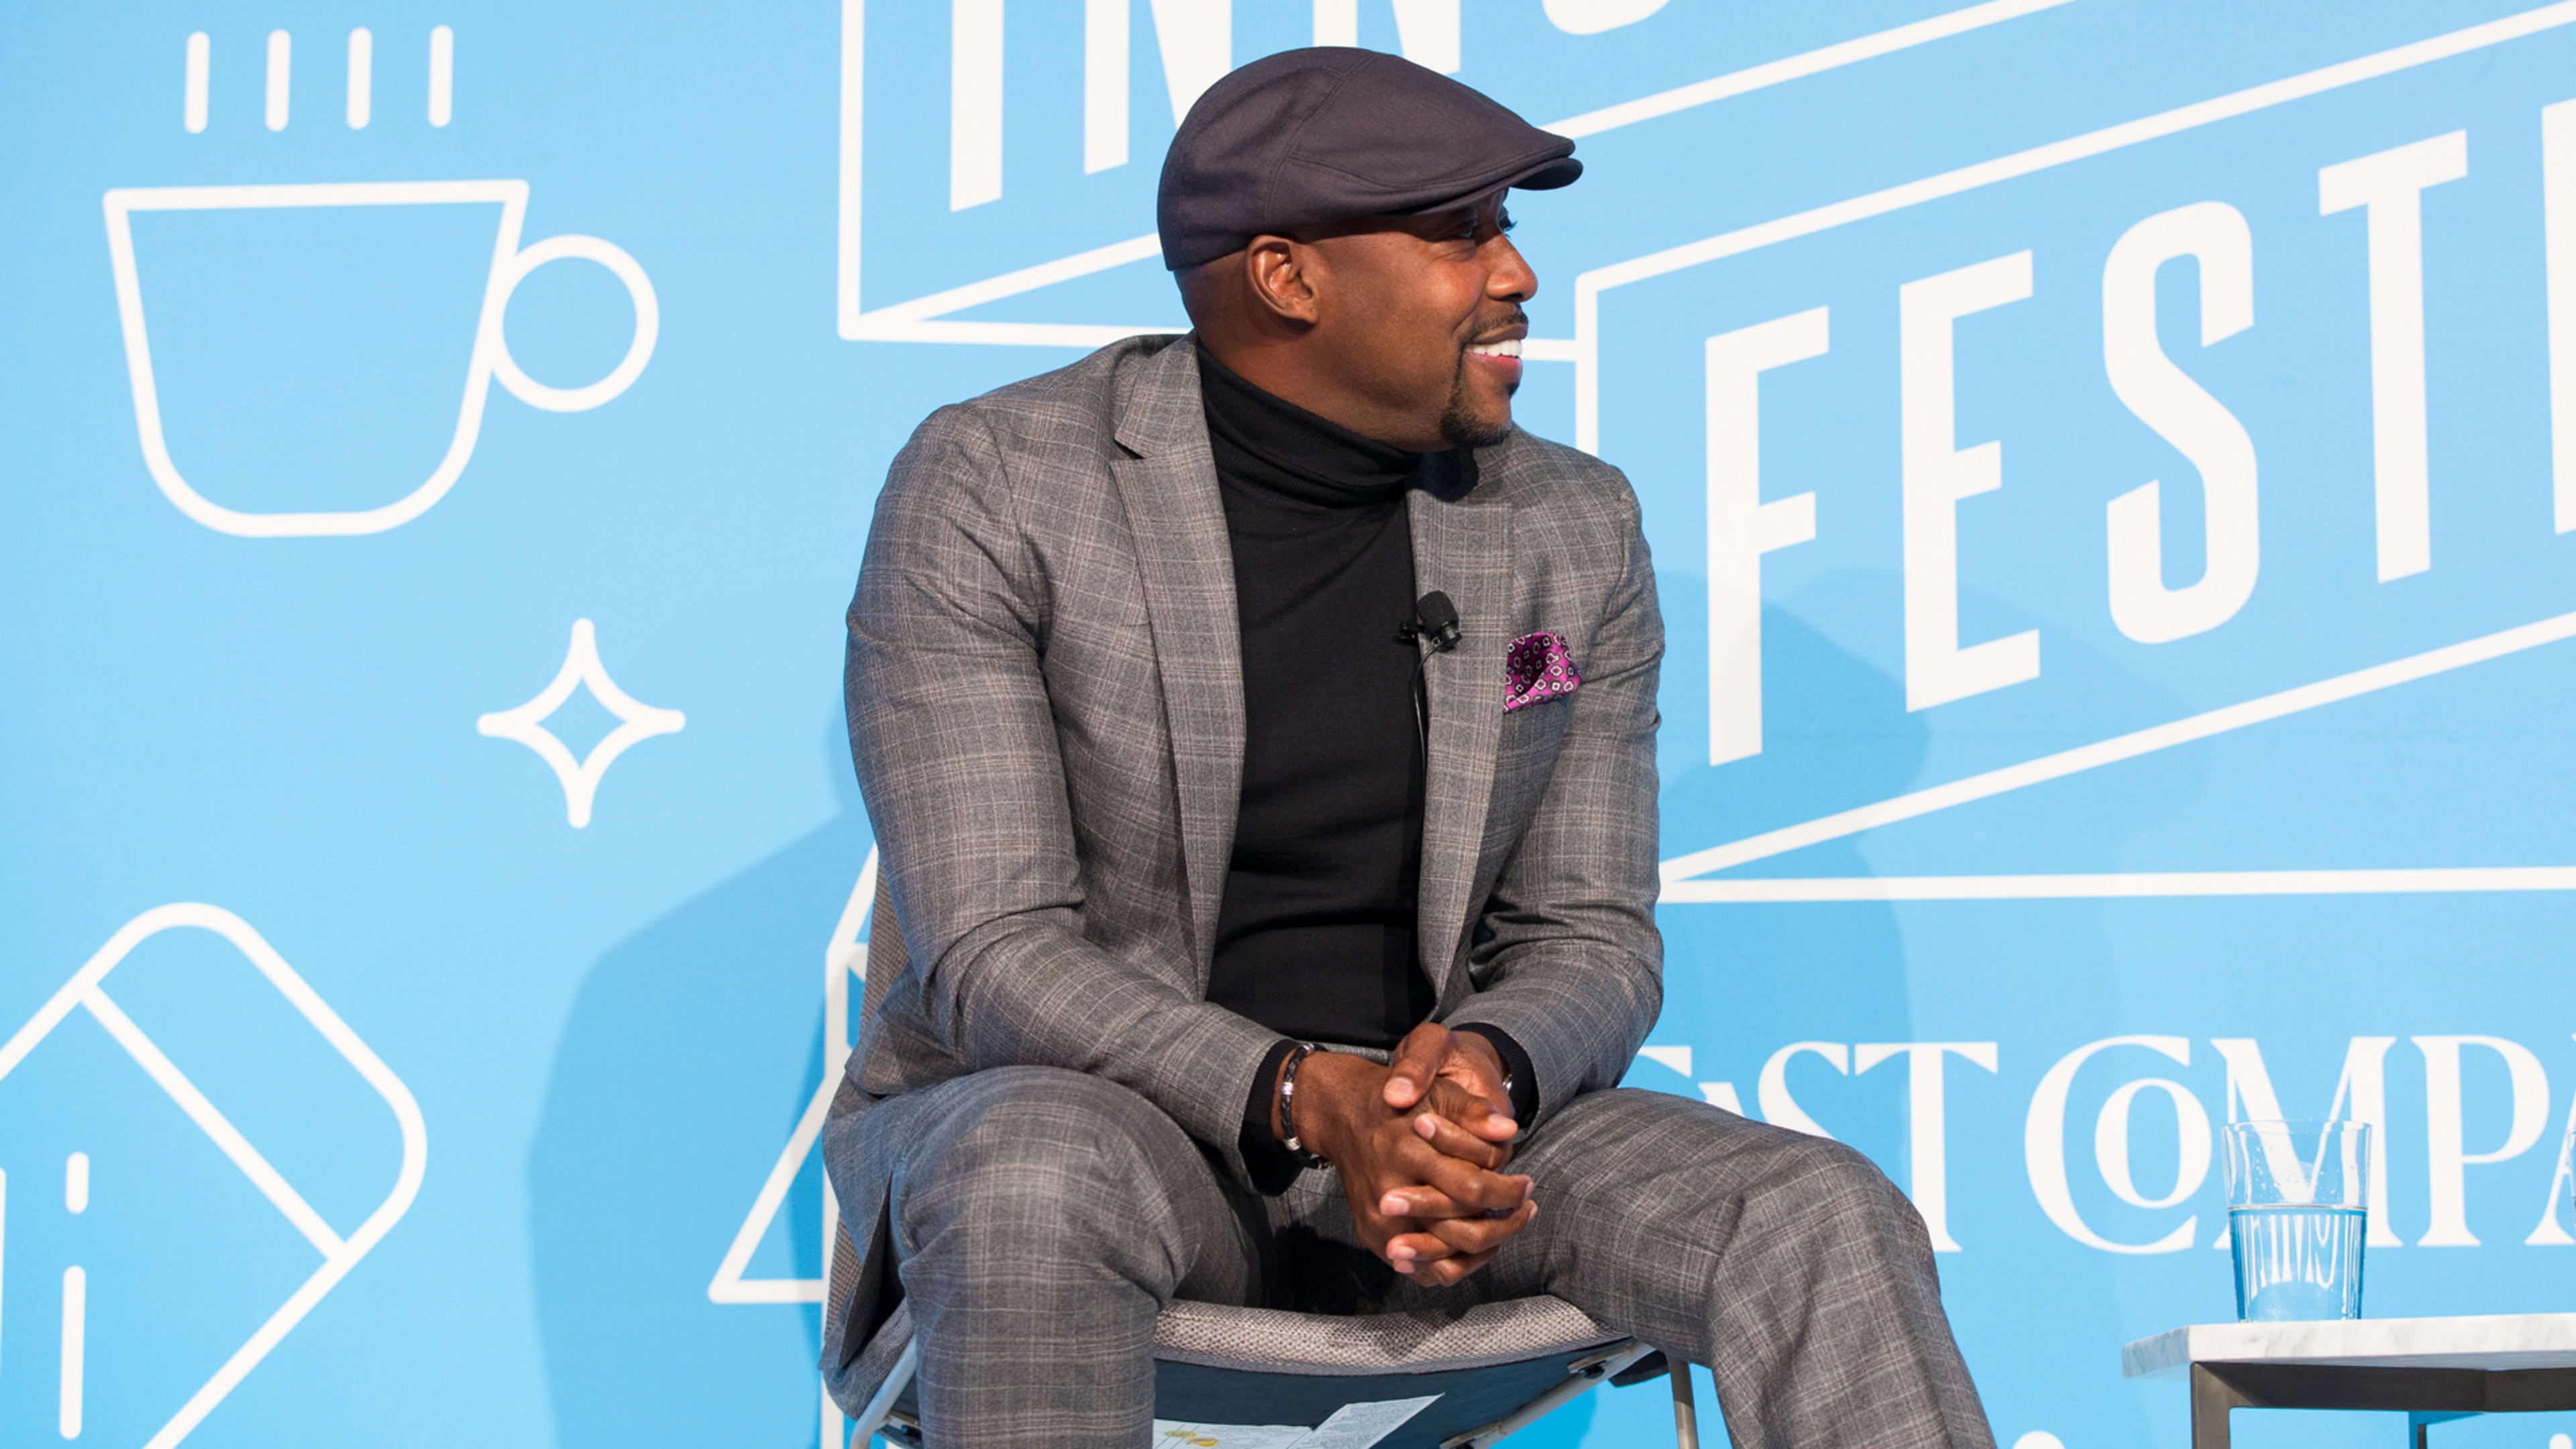 Producer Will Packer says Georgia’s controversial abortion law won’t drive him out of Atlanta